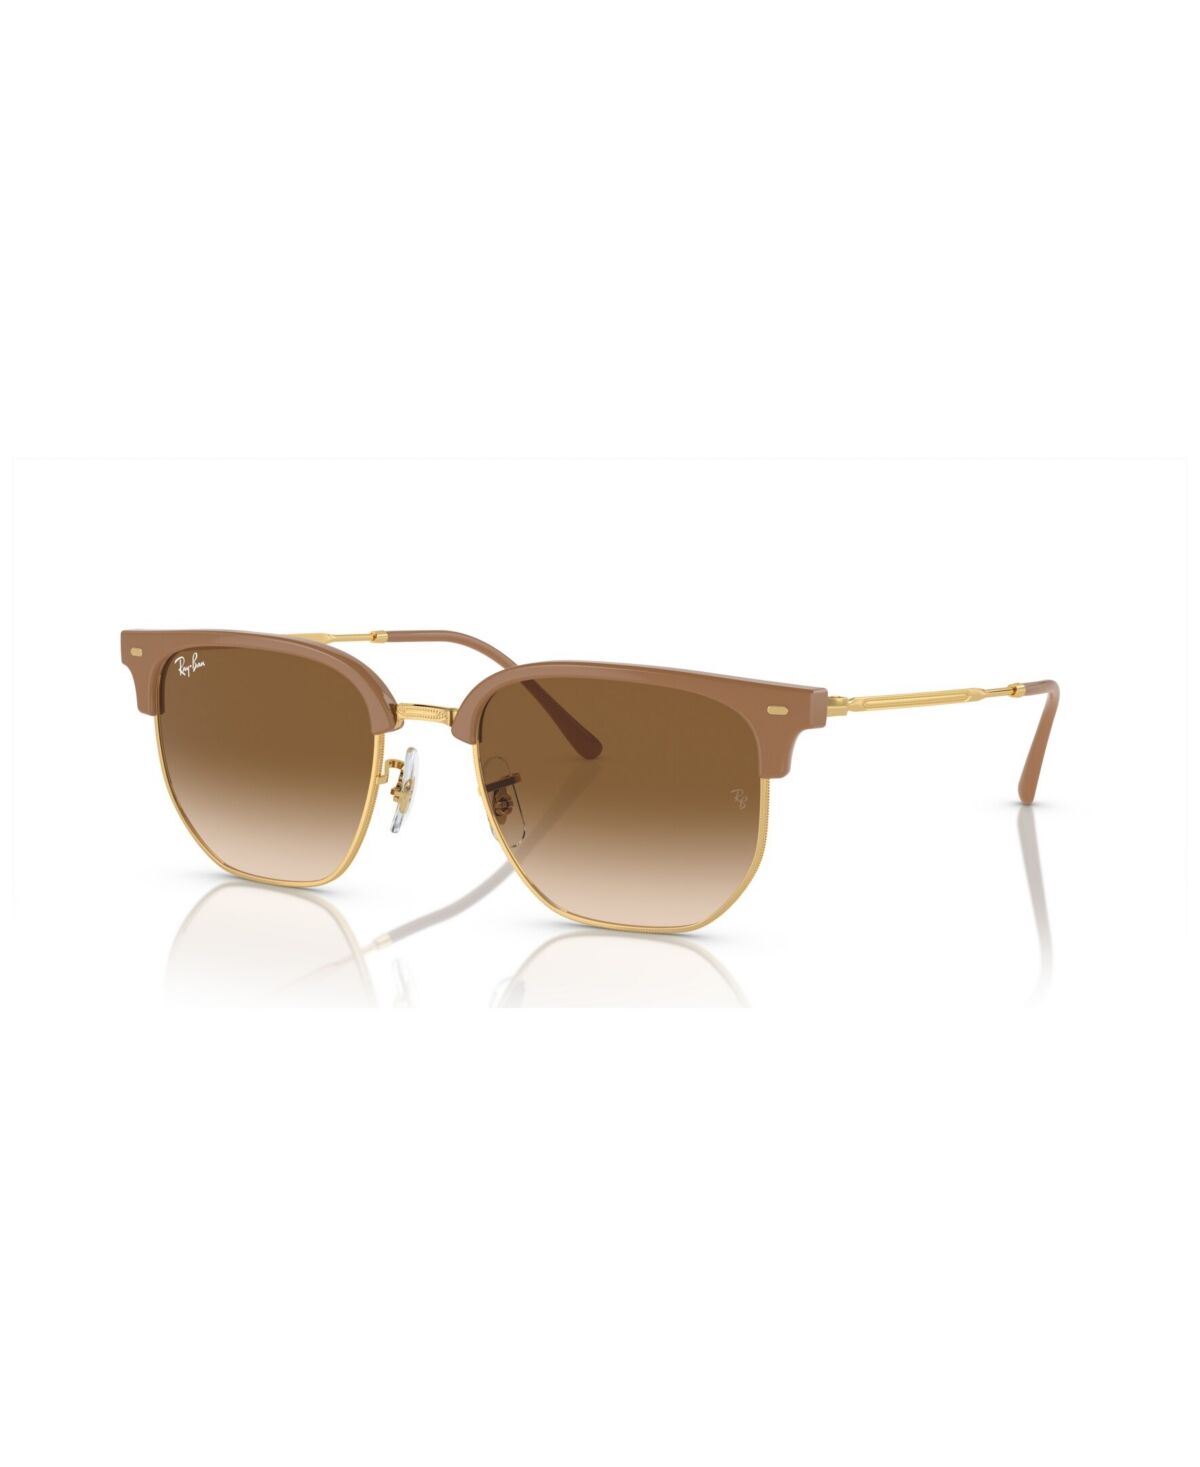 Ray-Ban Unisex New Clubmaster Sunglasses, Gradient RB4416 - Beige on Gold